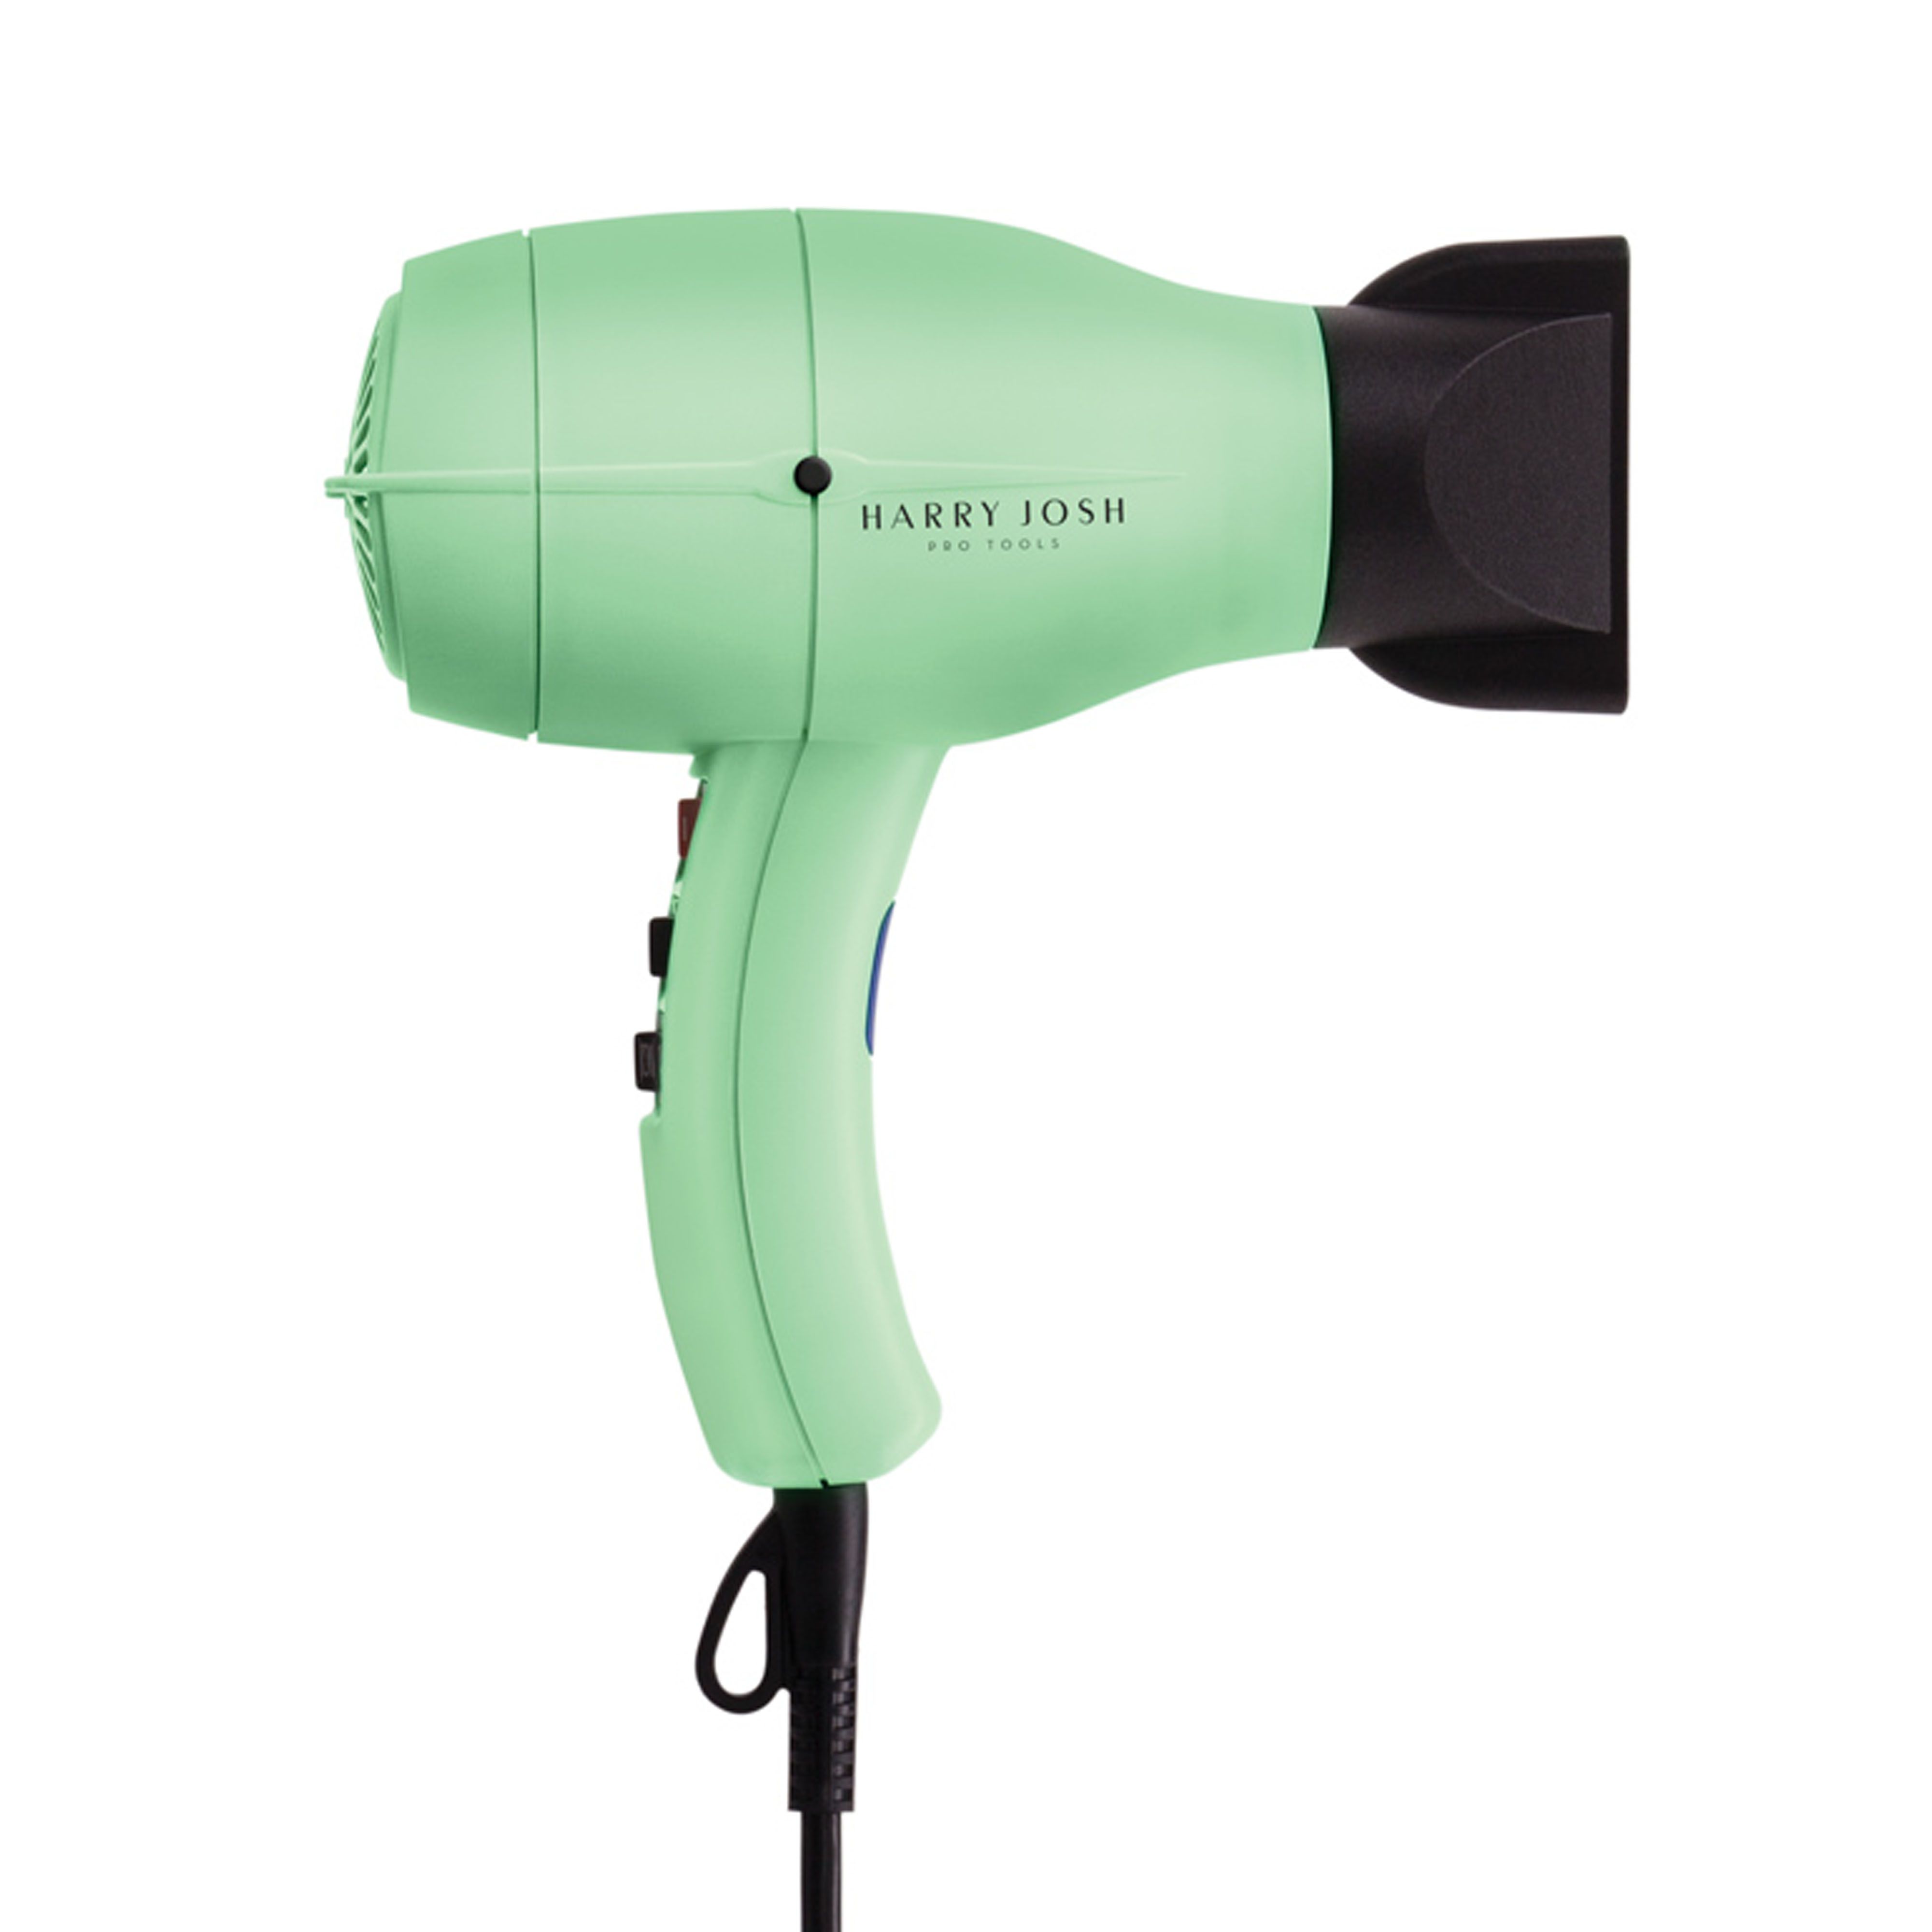 Harry Josh Pro Tools Pro Hair Dryer 2000 Review Price And Features